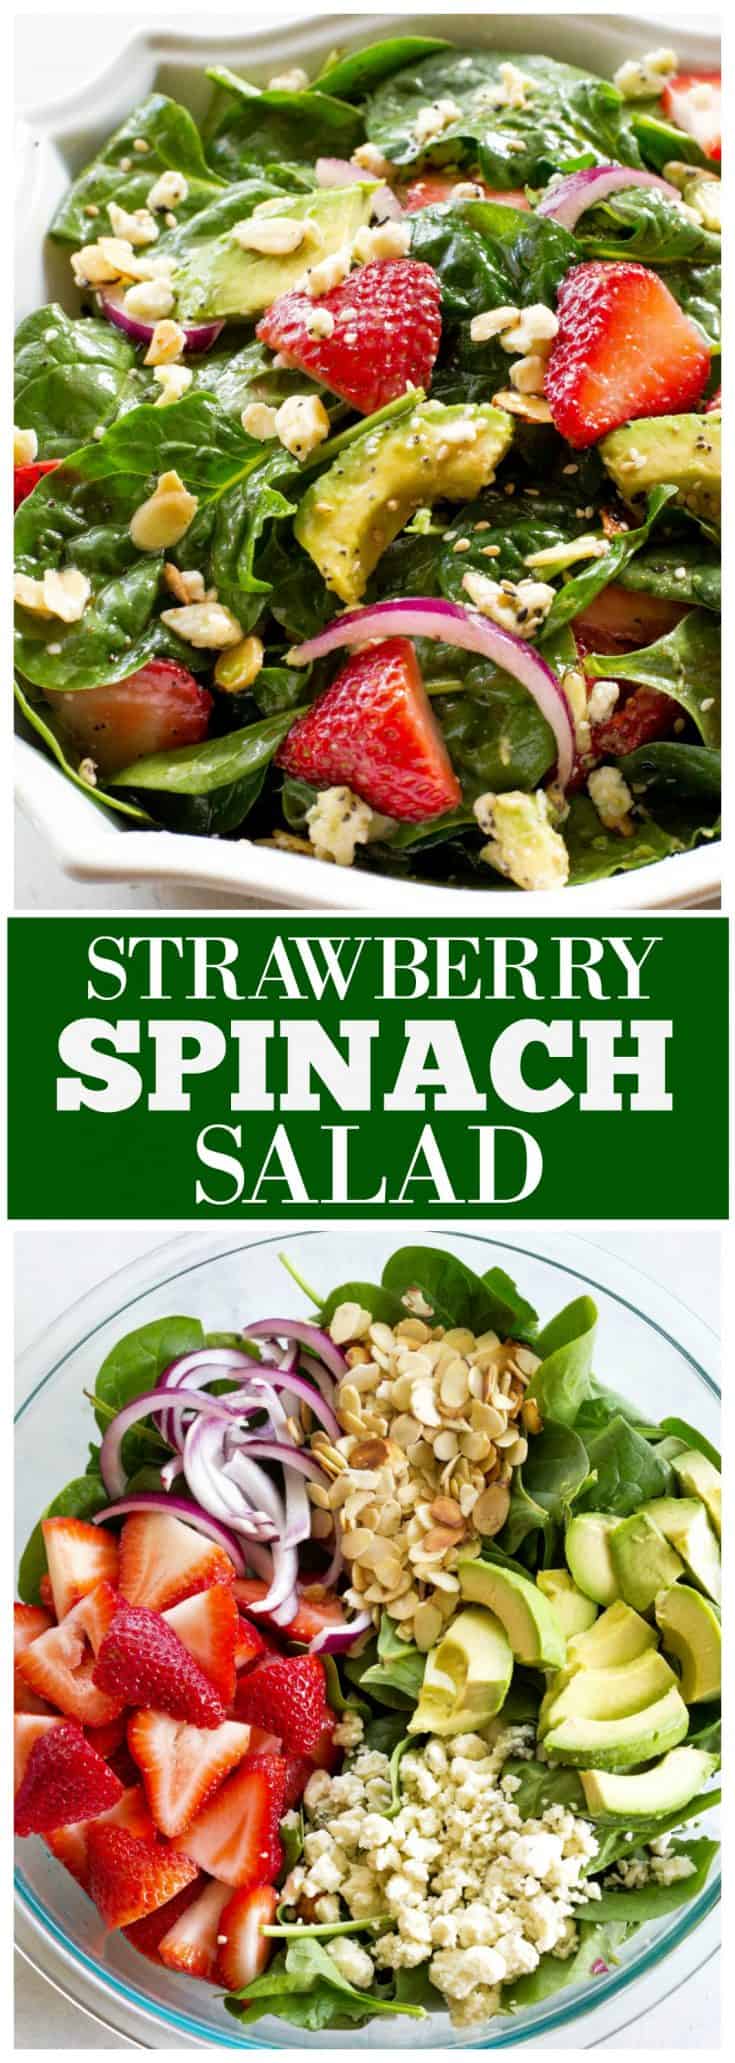 Strawberry Spinach Salad - The Girl Who Ate Everything